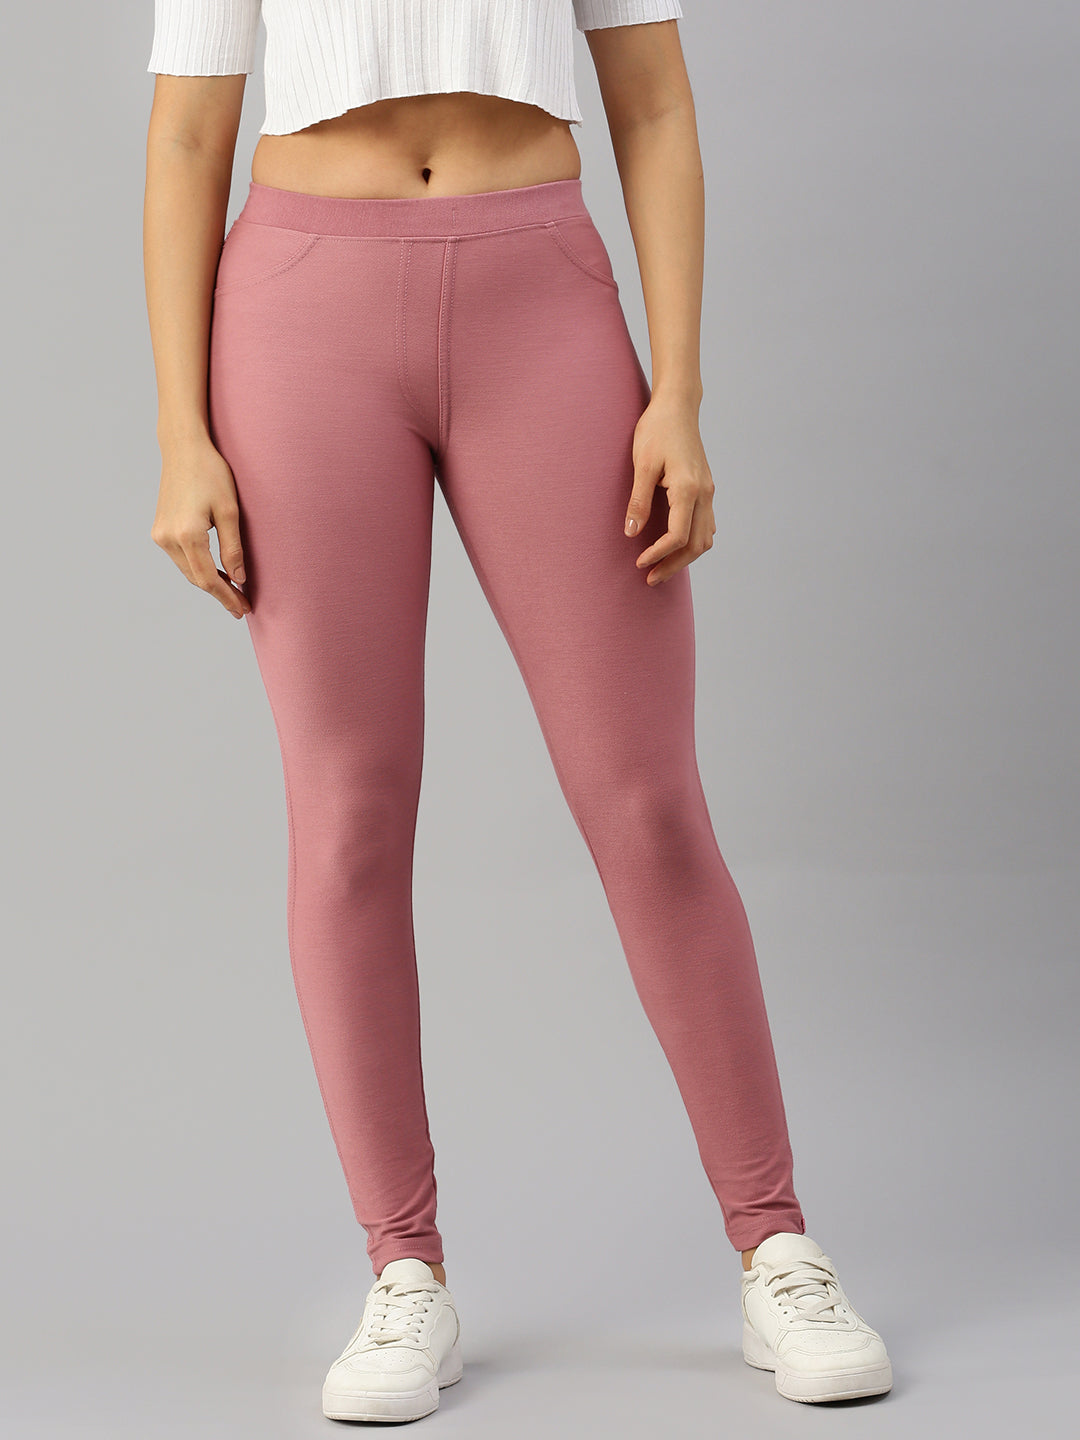 Stylish and Trendy Leggings That Will Turn Heads